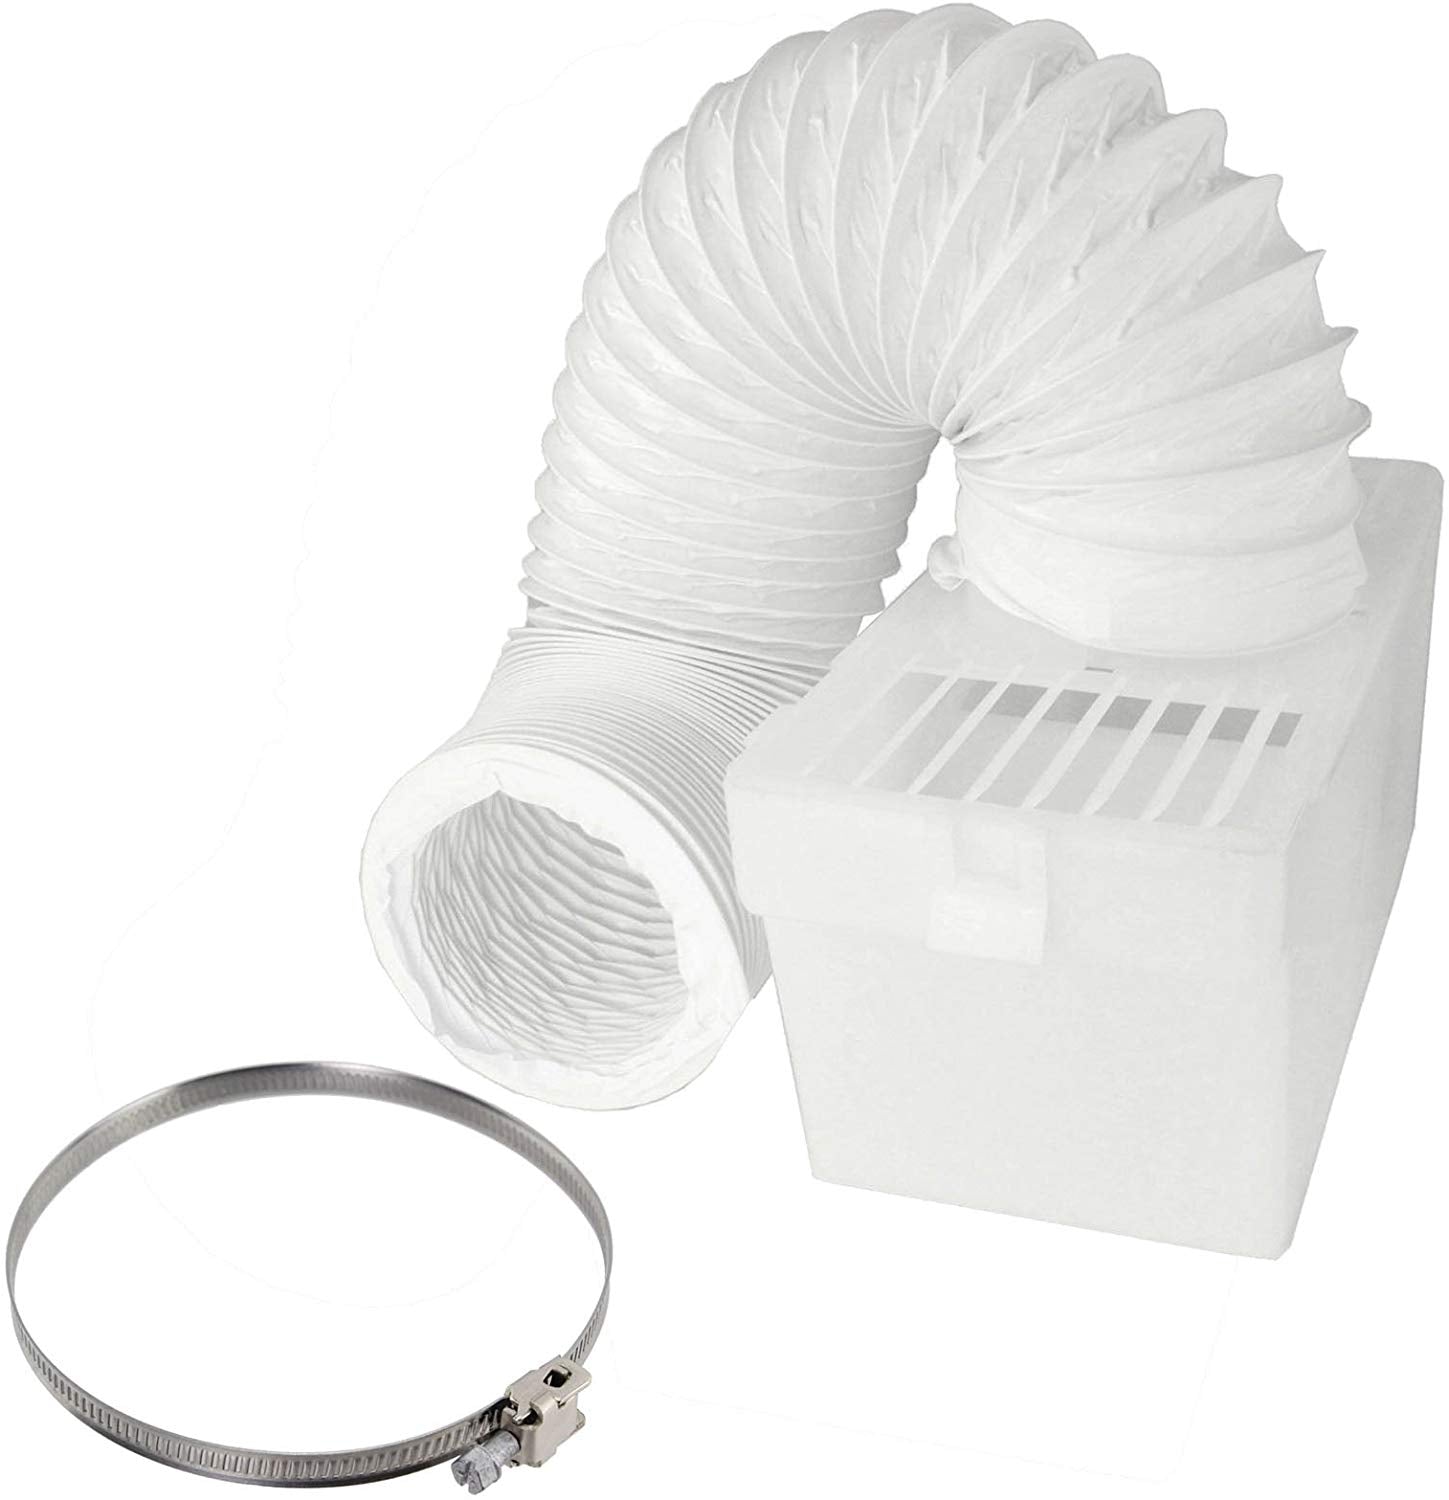 Condenser Vent Box & Hose Kit With Screw Clip for Kenwood Vented Tumble Dryer (4" / 100mm Diameter)